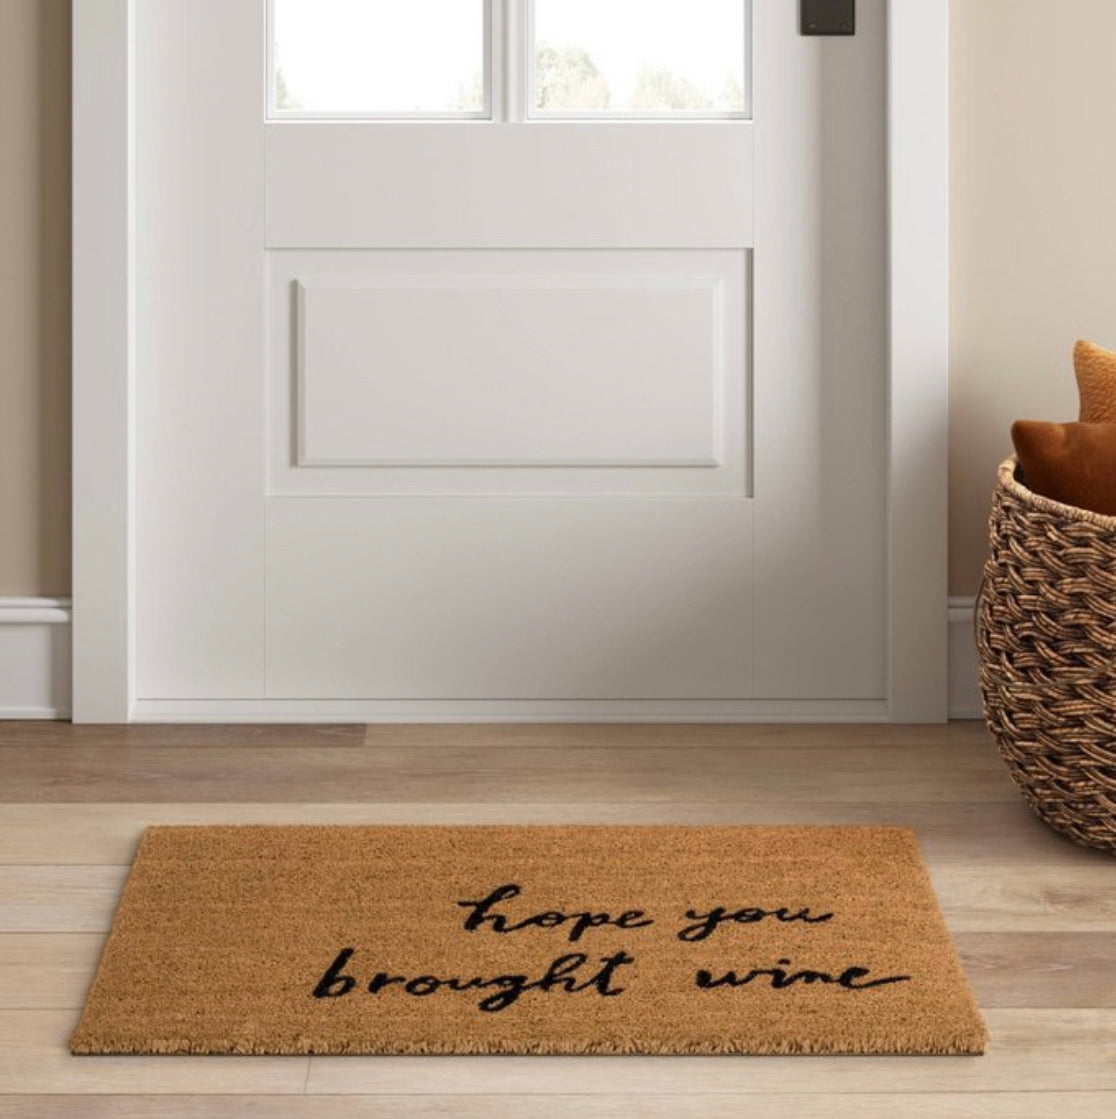 “Hope you brought wine” Doormat - The Power Chic